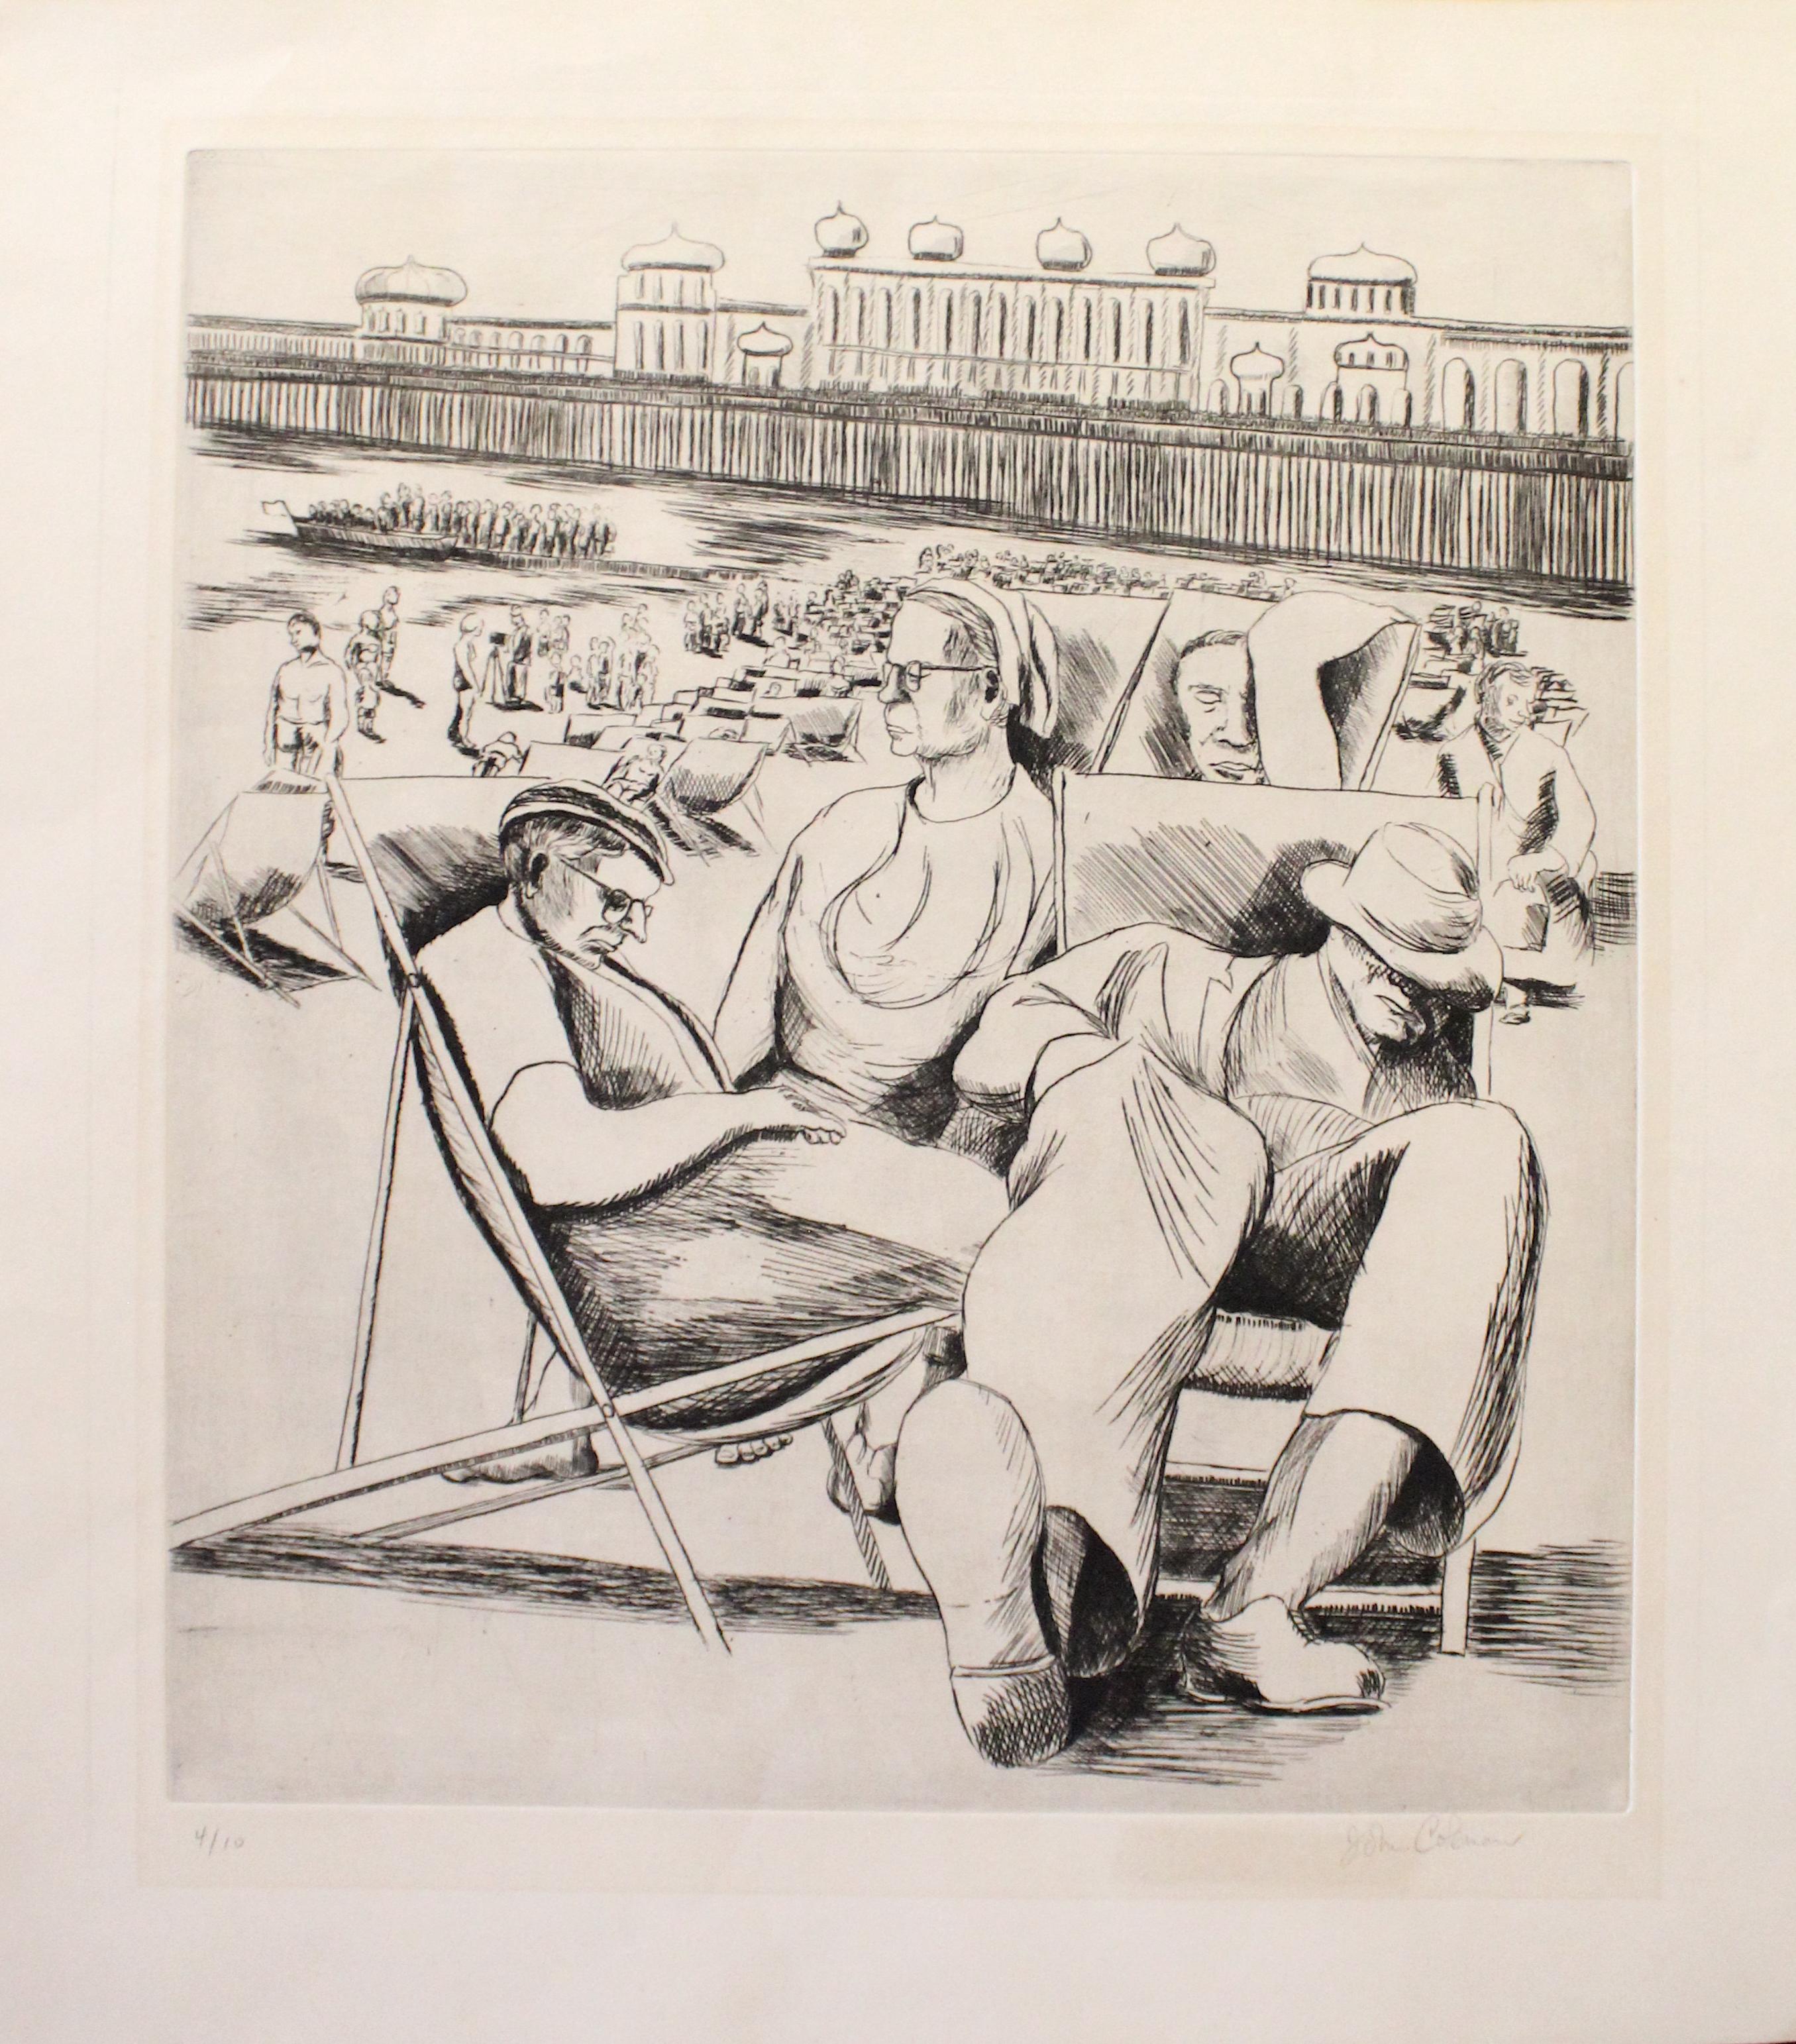 This piece by John Coleman was featured in the First National Print Exhibition of the Silvermine Guild of Artists, Inc. It features a beach scene of Llandudno, a town in north Whales.

This print is number 4/10 and is signed in the lower left corner.